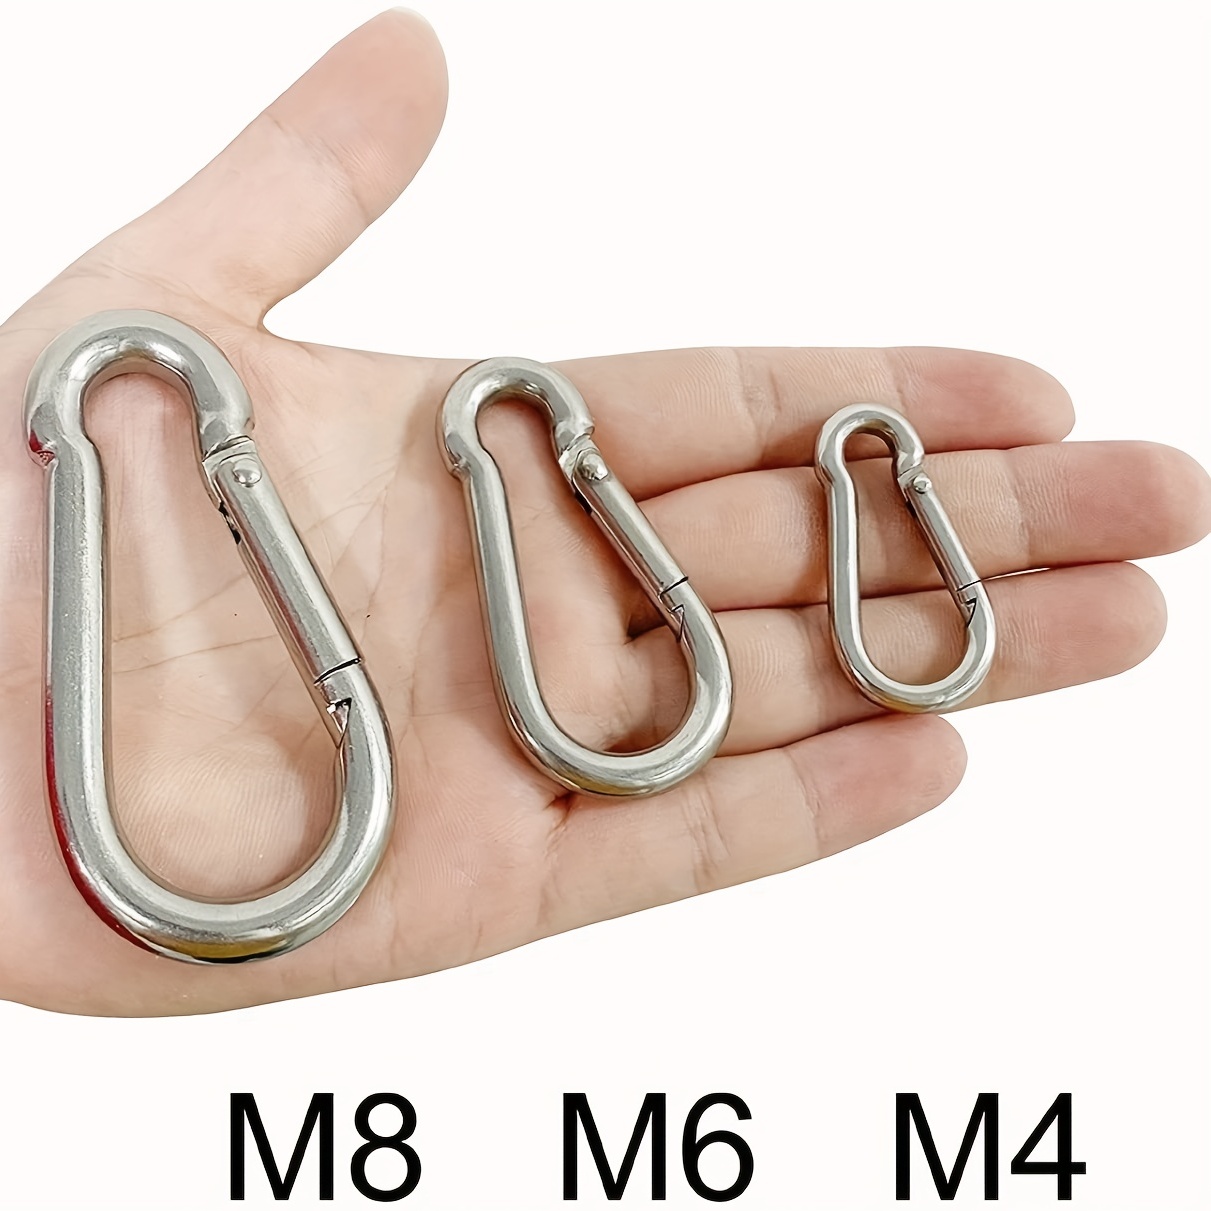 Small Carabiner Clip Stainless Steel Spring Snap Hook For Bird Feeders Or Dog  Leash Harness Quick Link Keychain 40 80mm Hole 150 500lb, Buy More, Save  More